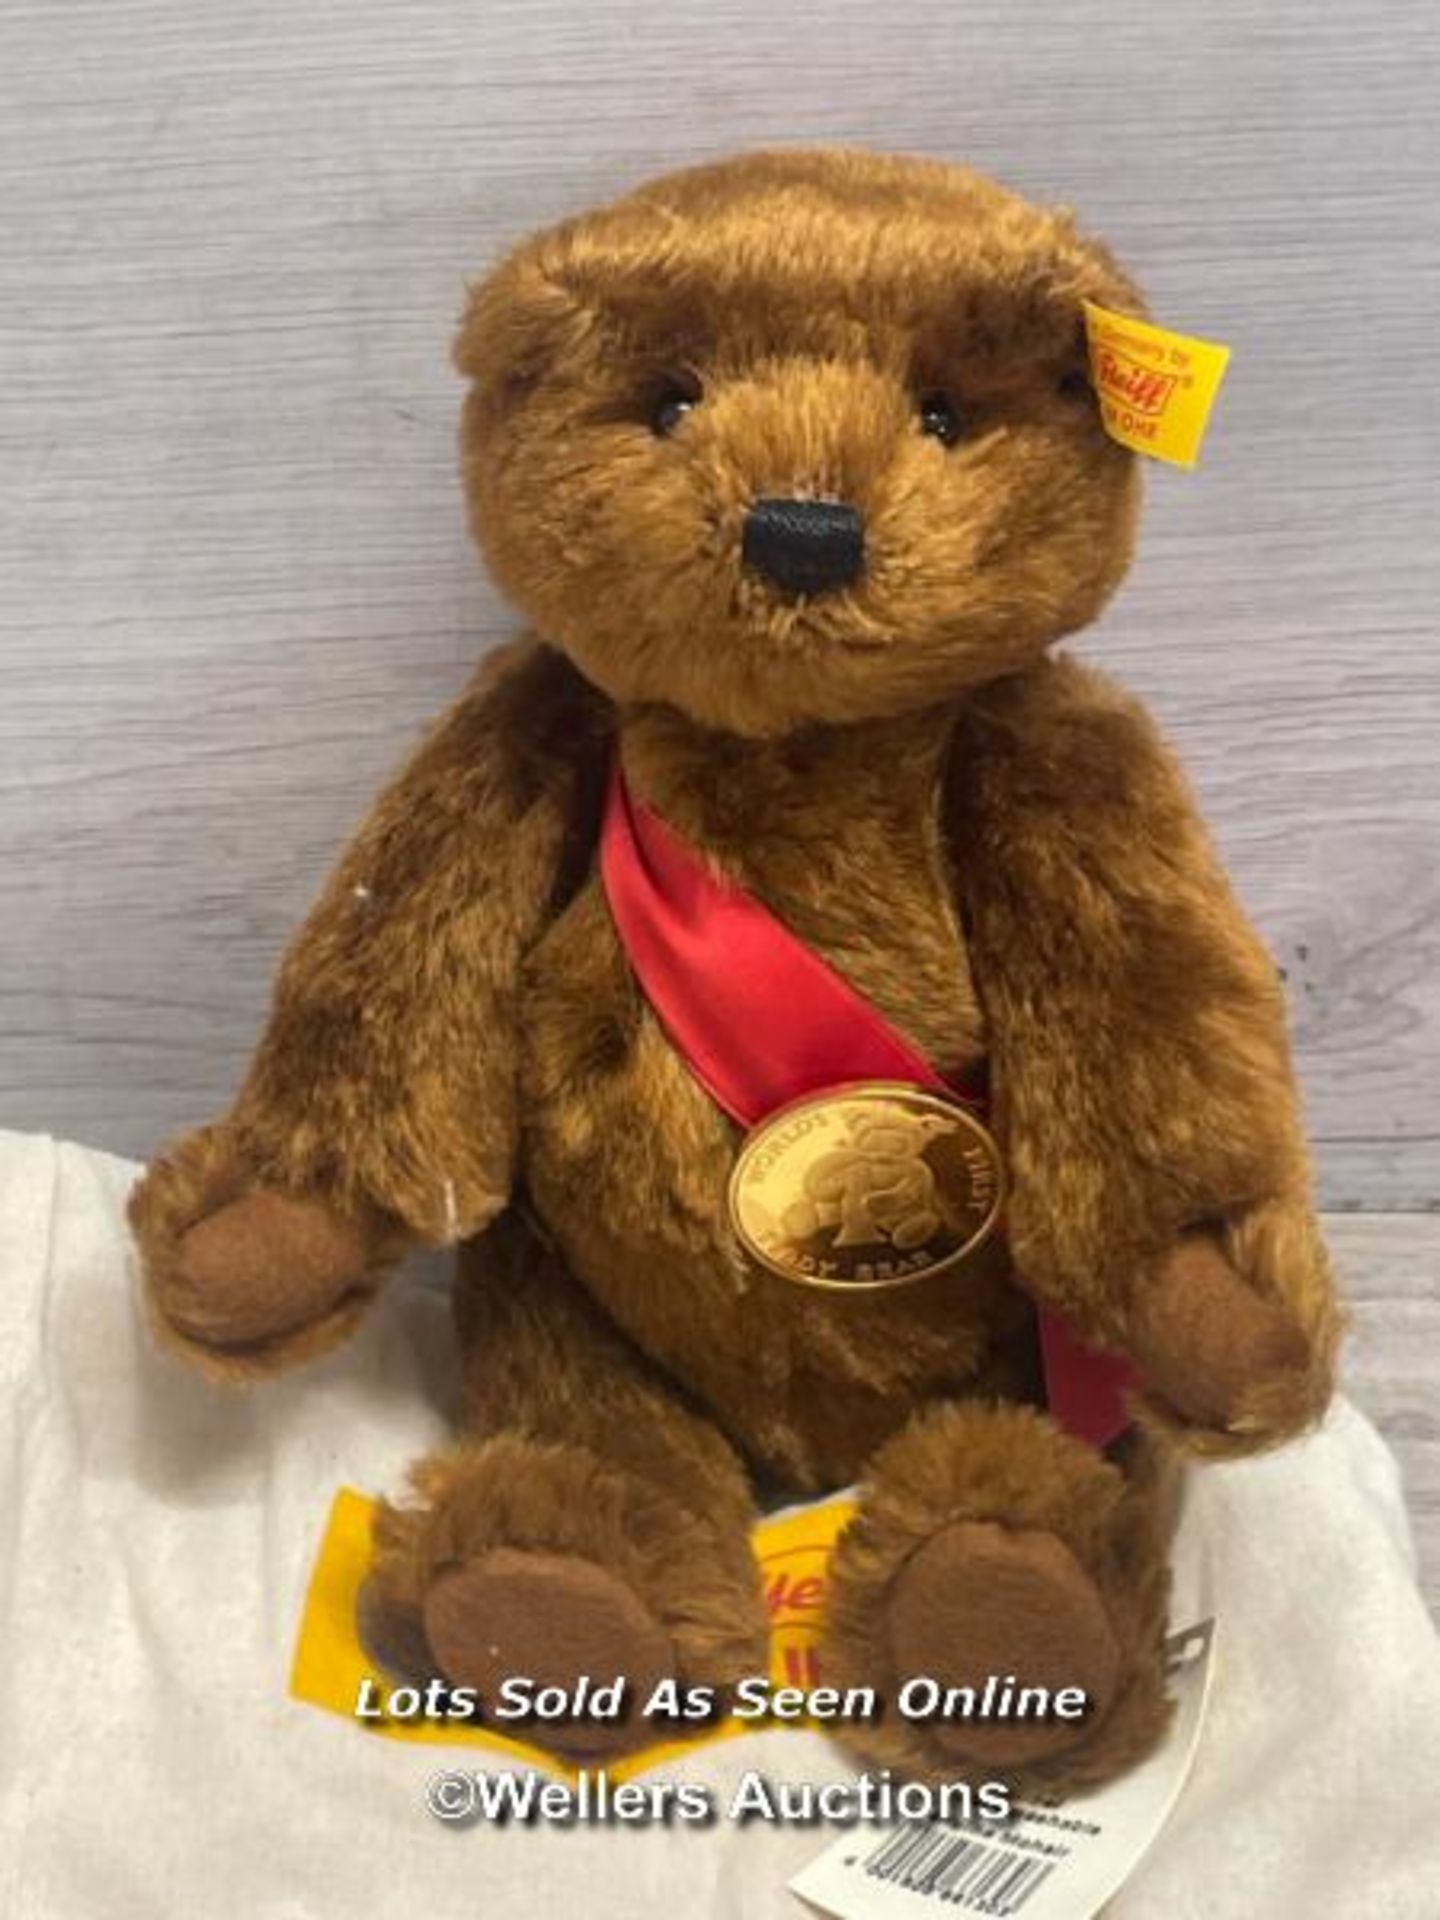 STIEFF BEAR NO. 661303, VERY GOOD CONDITION WITH TAGS